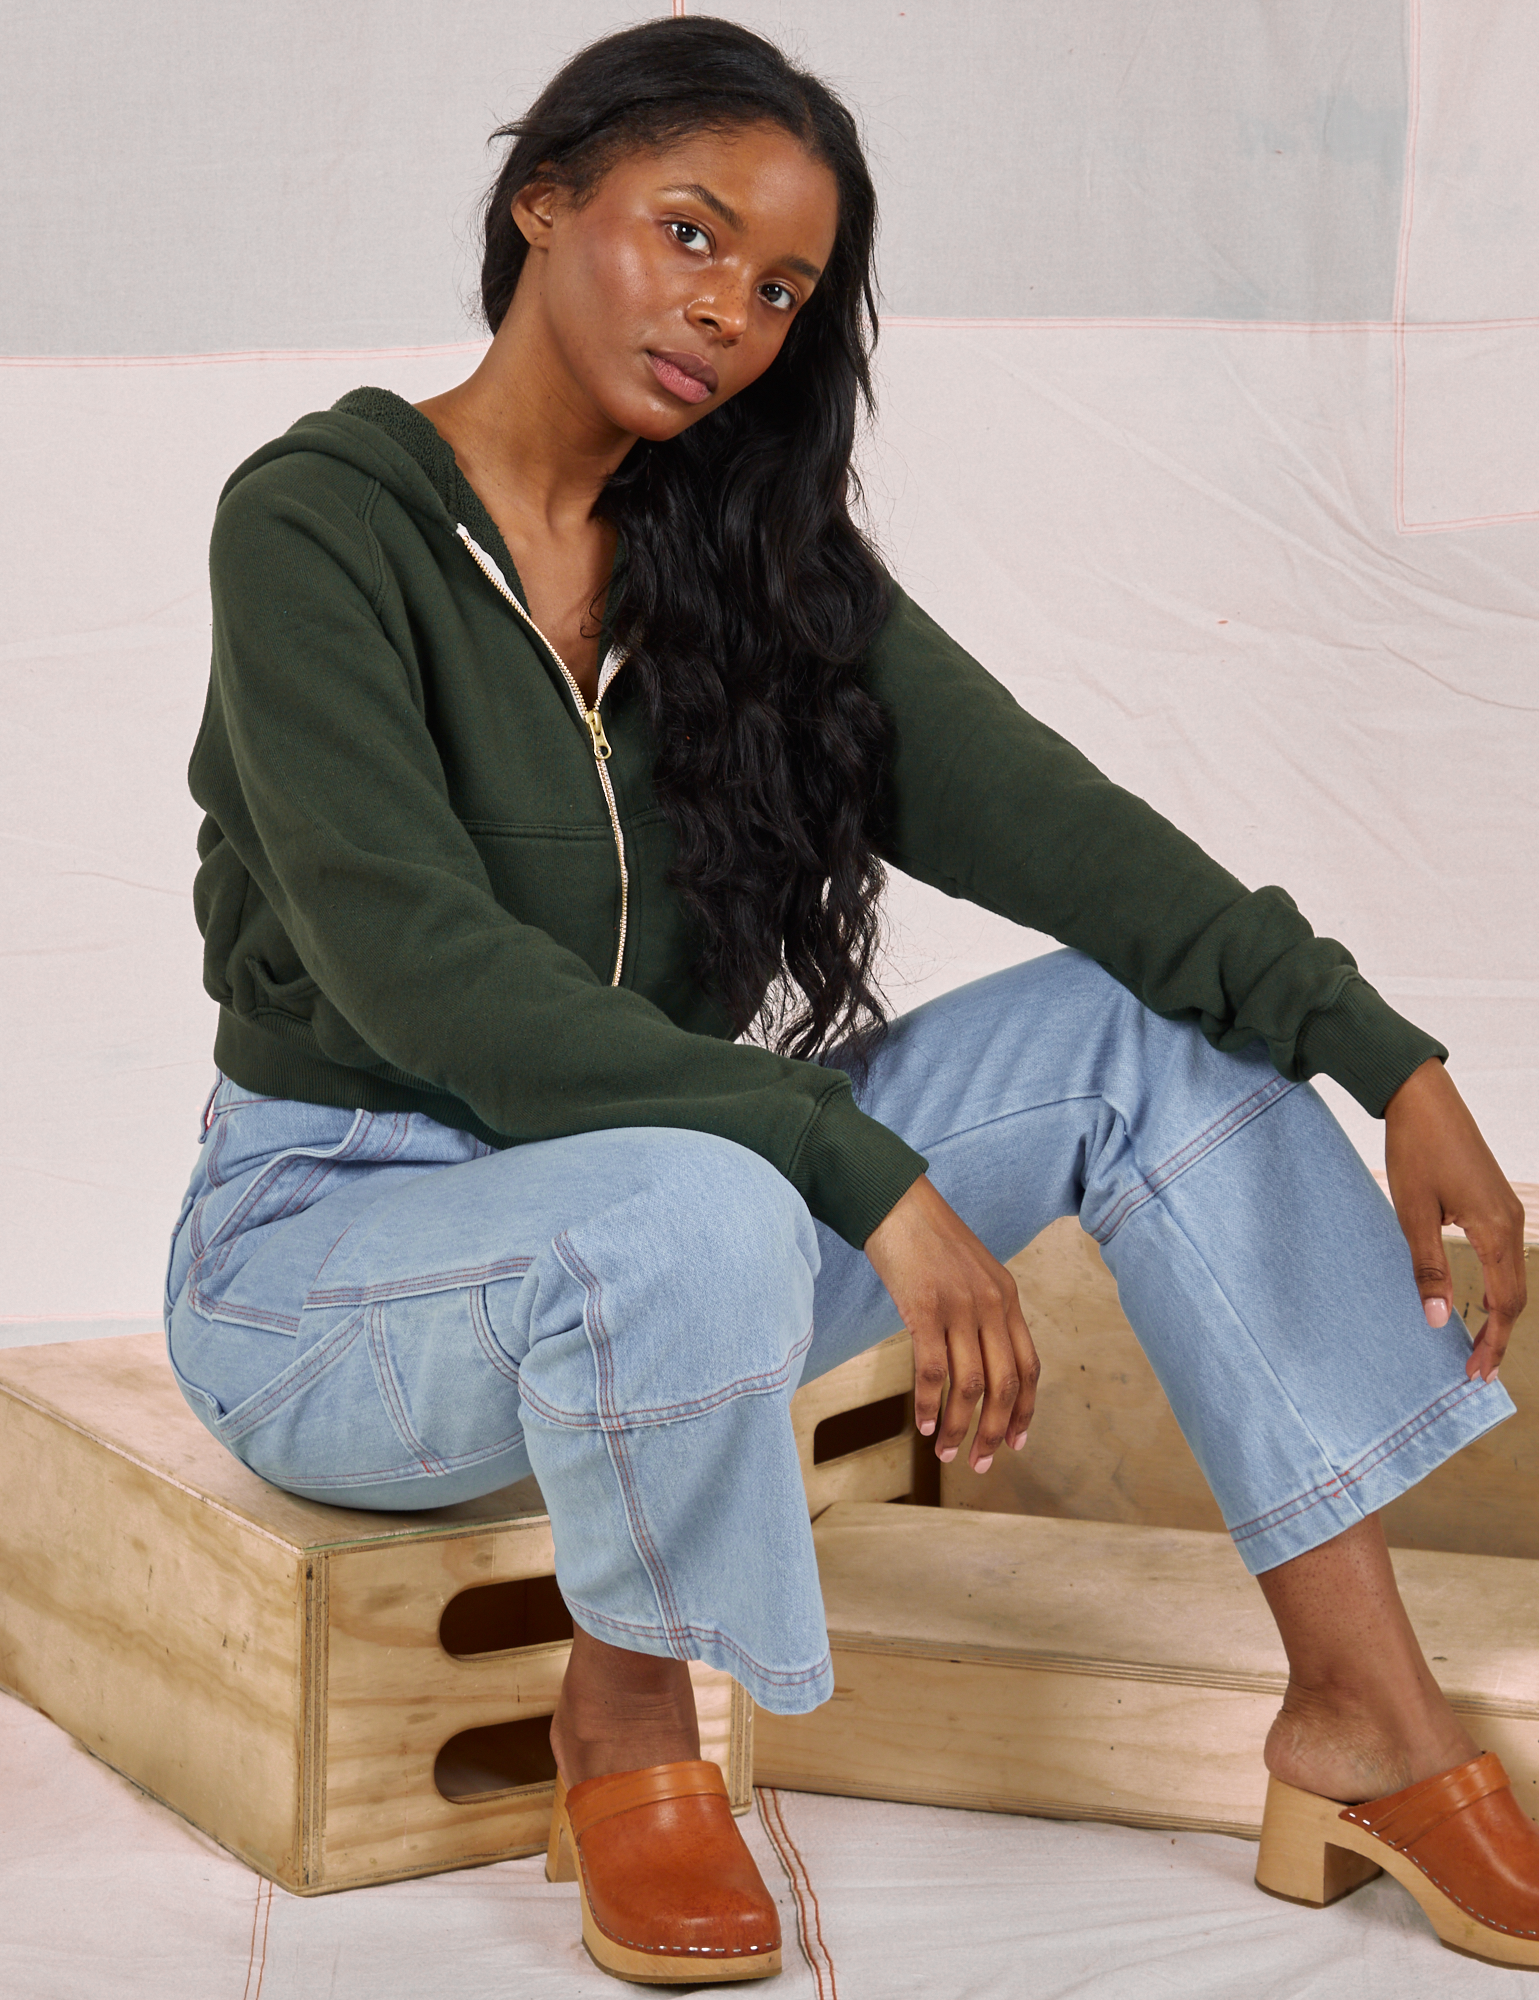 Kandia is wearing Cropped Zip Hoodie in Swamp Green and light wash Carpenter Jeans